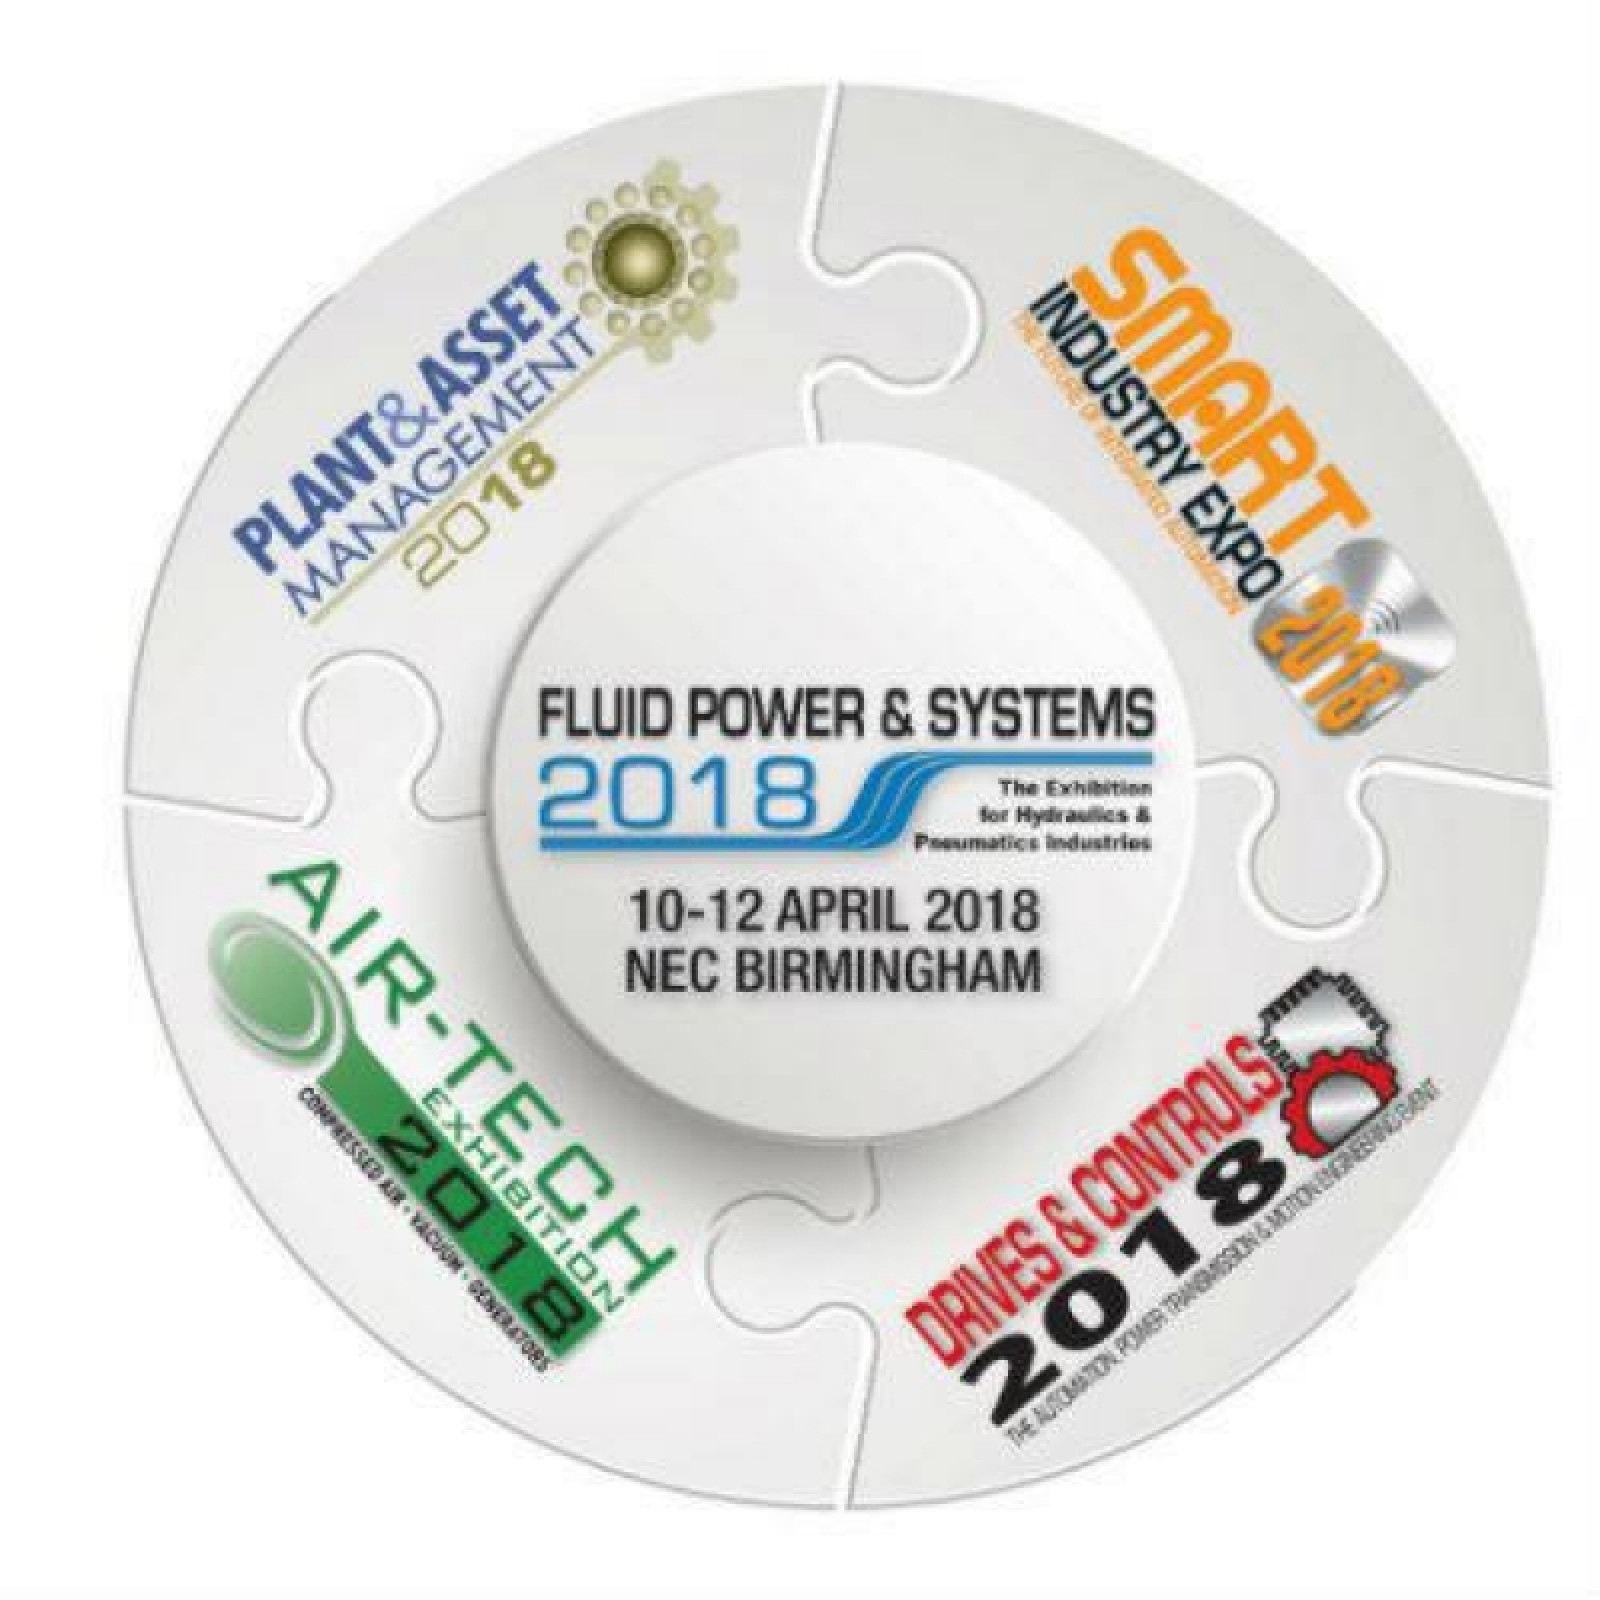 Hayley Fluid Power plans to raise the bar at Fluid Power & Systems 2018 Exhibition